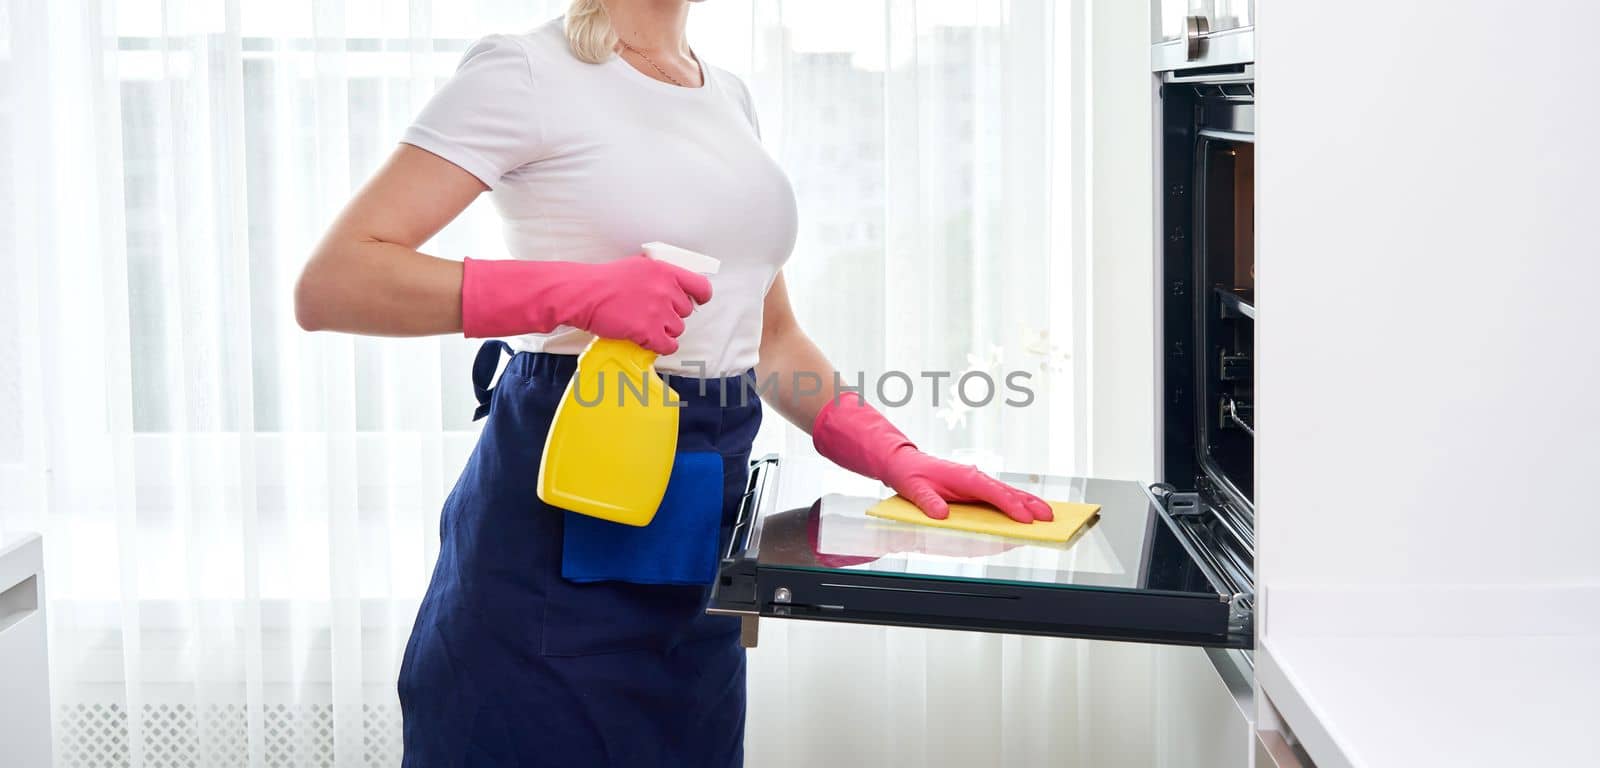 Young woman wearing gloves cleaning oven in the kitchen. Cleaning service concept by Mariakray